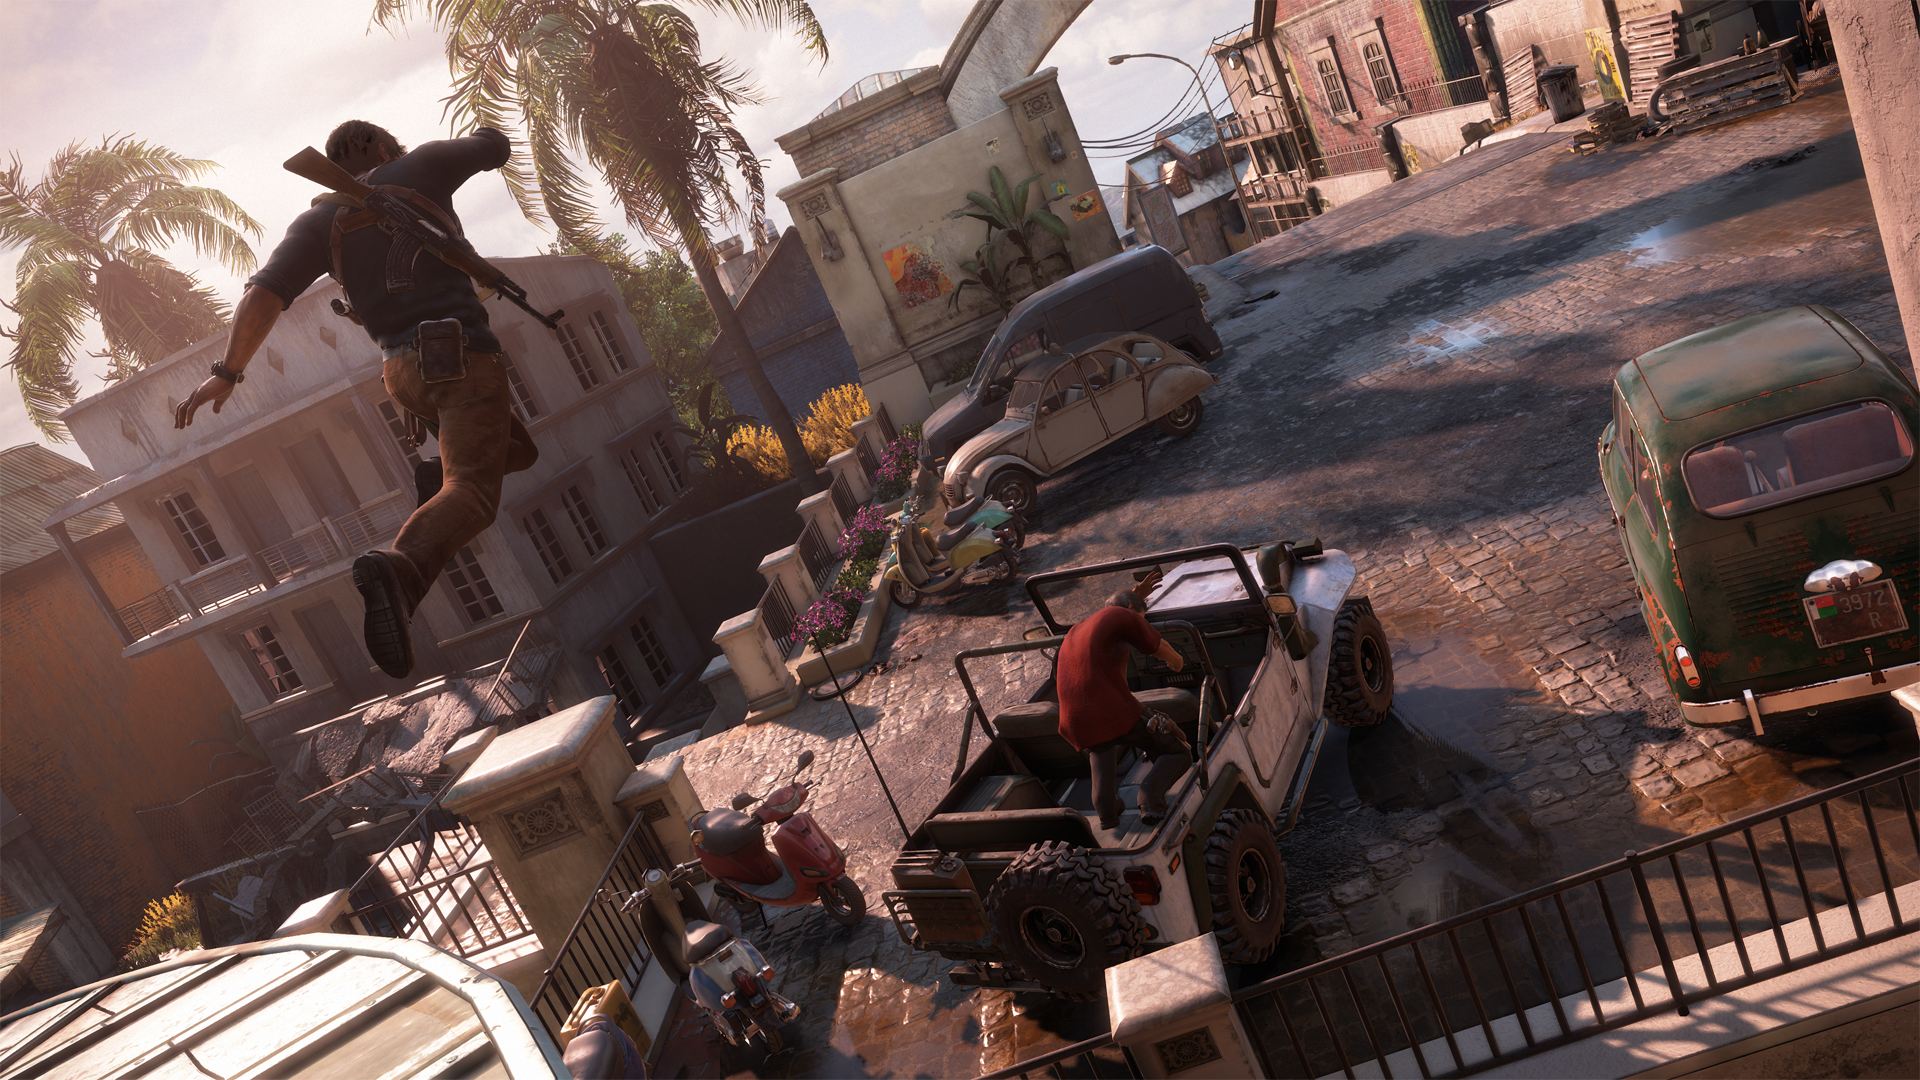 uncharted 4: a thief's end, video game, nathan drake, uncharted phone wallpaper